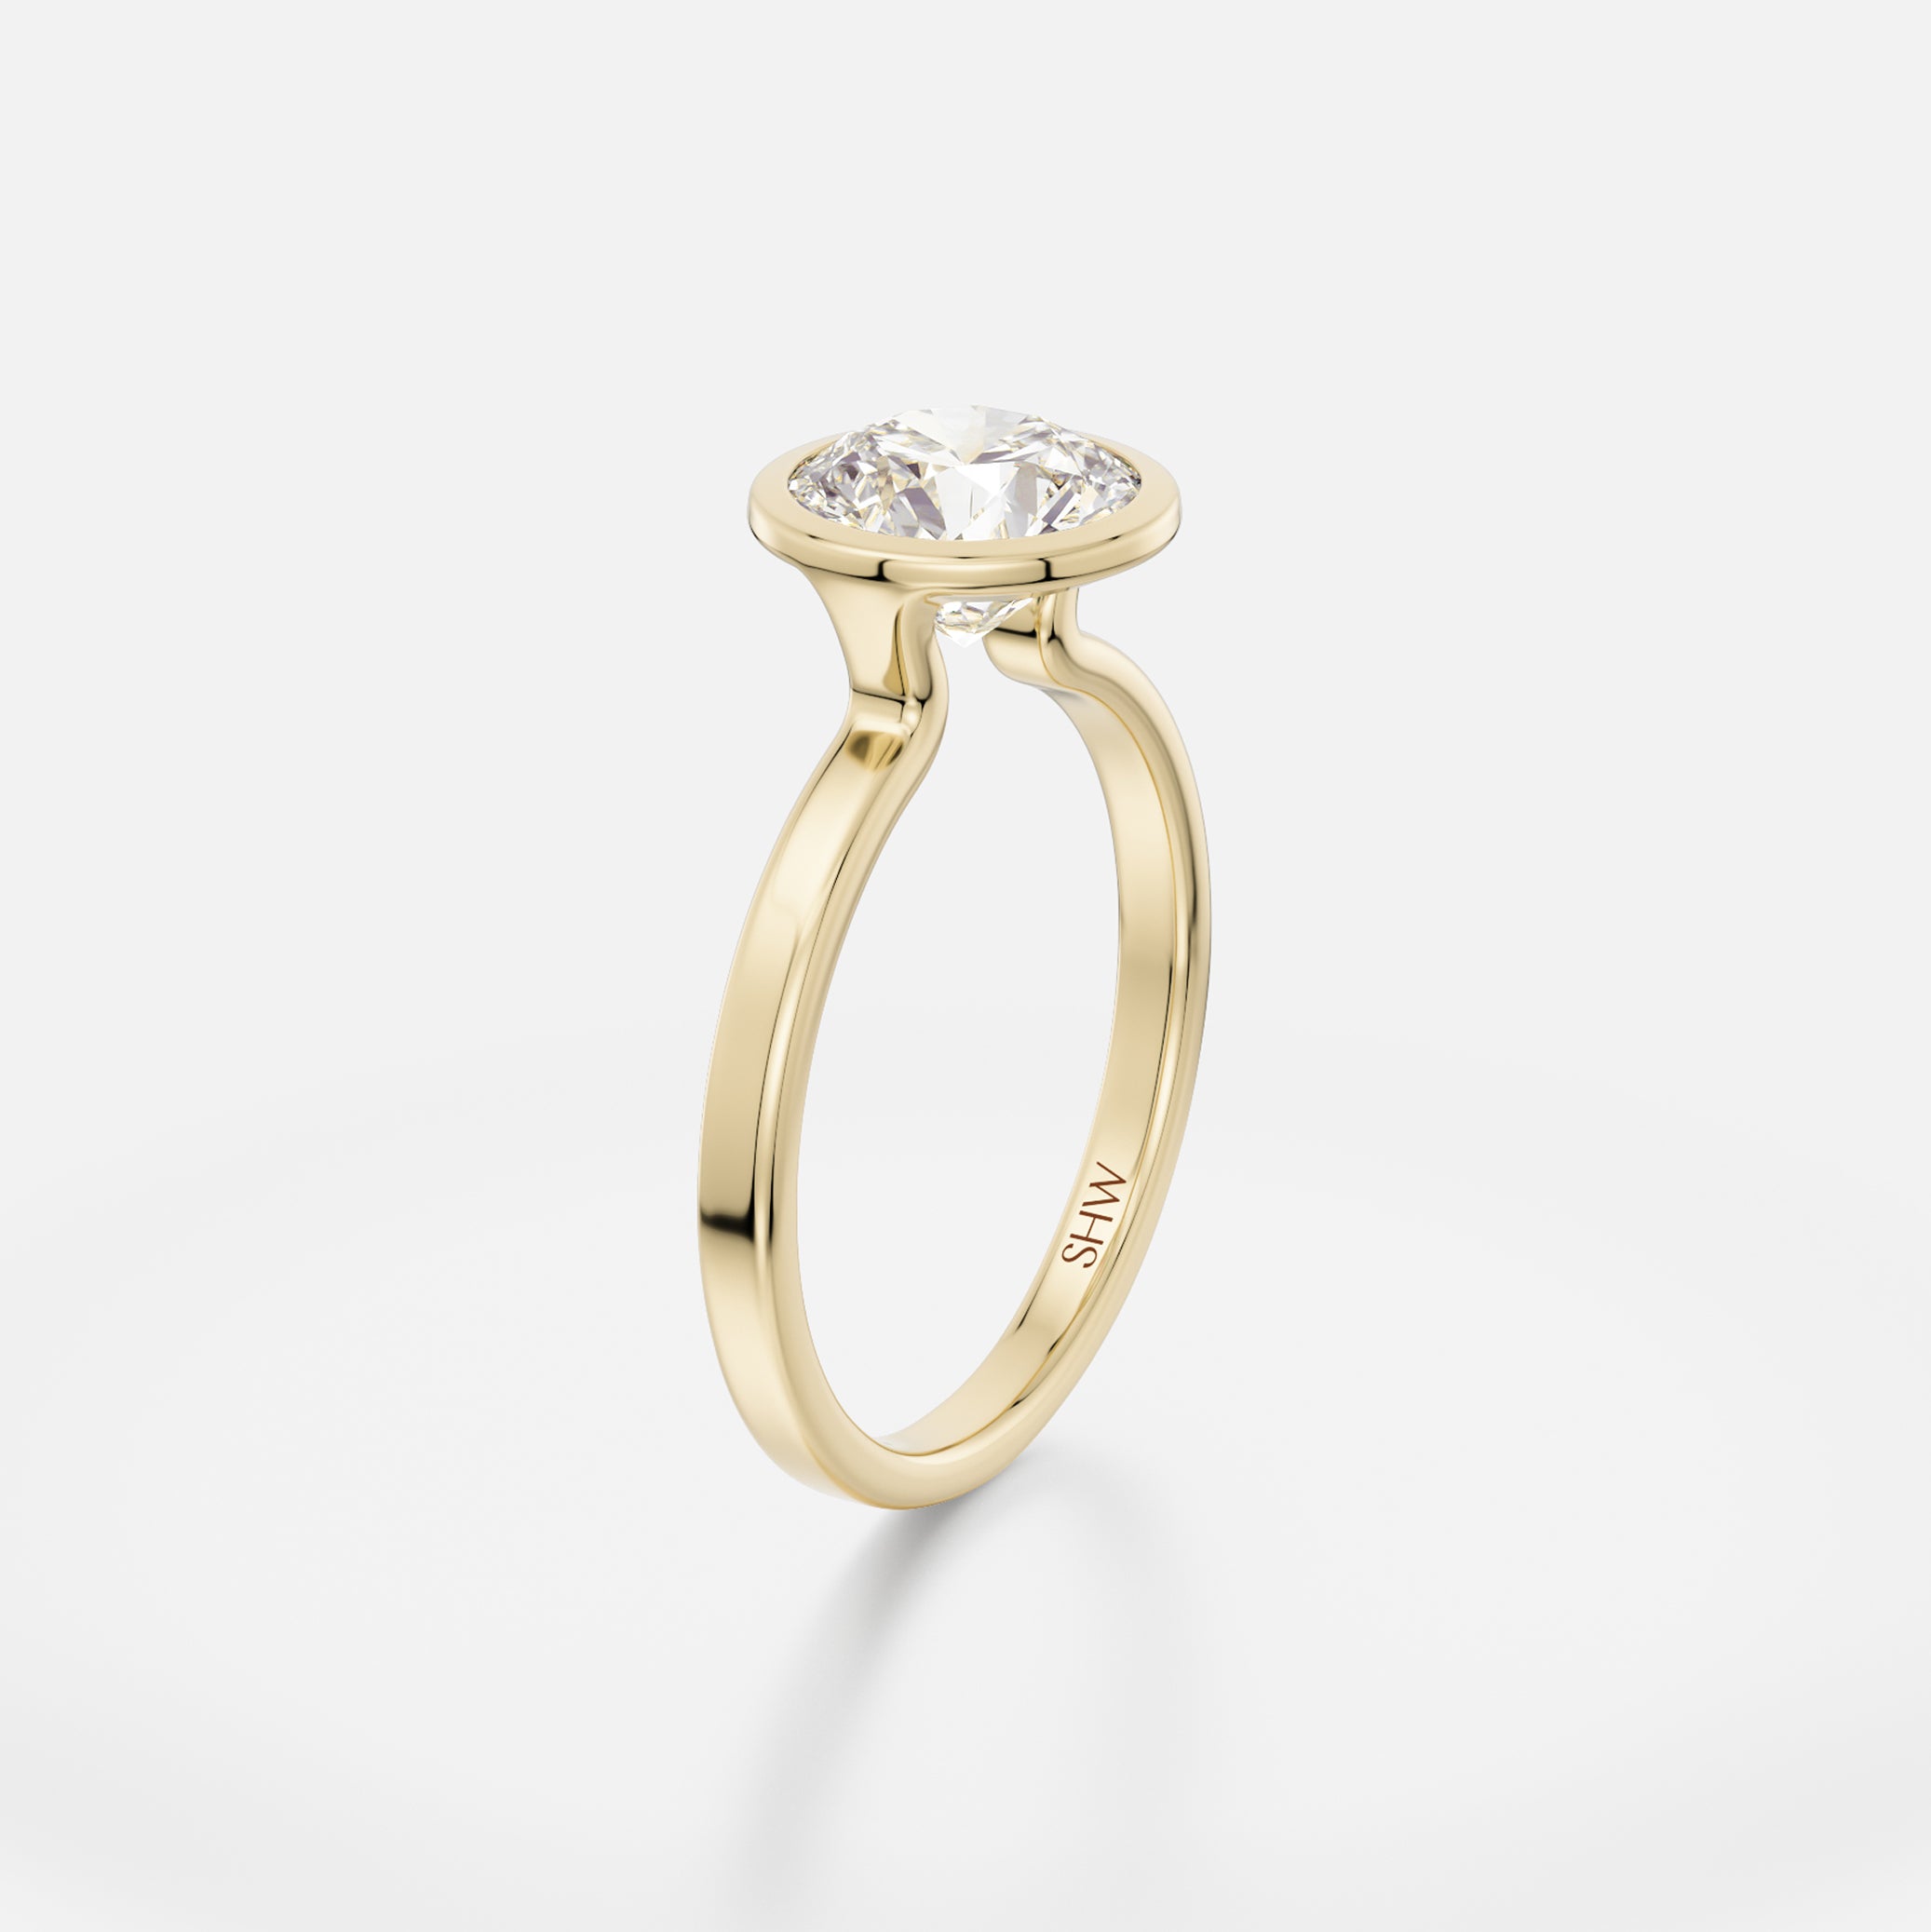 Mana Thin Square Band with Round Minimalist Engagement Ring Setting handcrafted by SHW Fine Jewelry New York City